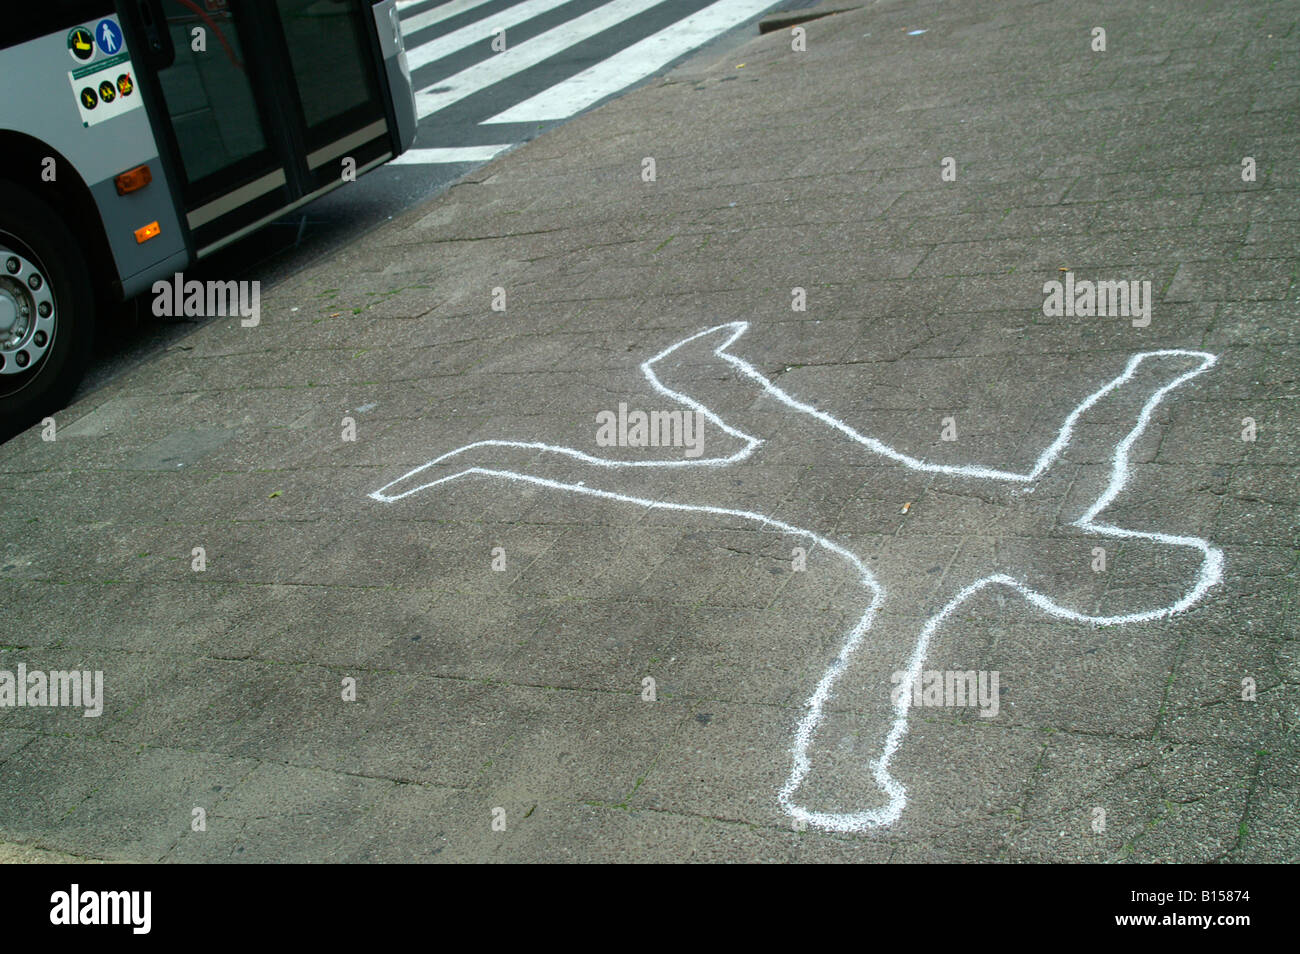 Chalk outline man figure body silhouette drawing fallen injury accident on pavement ground dead corpse bus stop traffic police Stock Photo